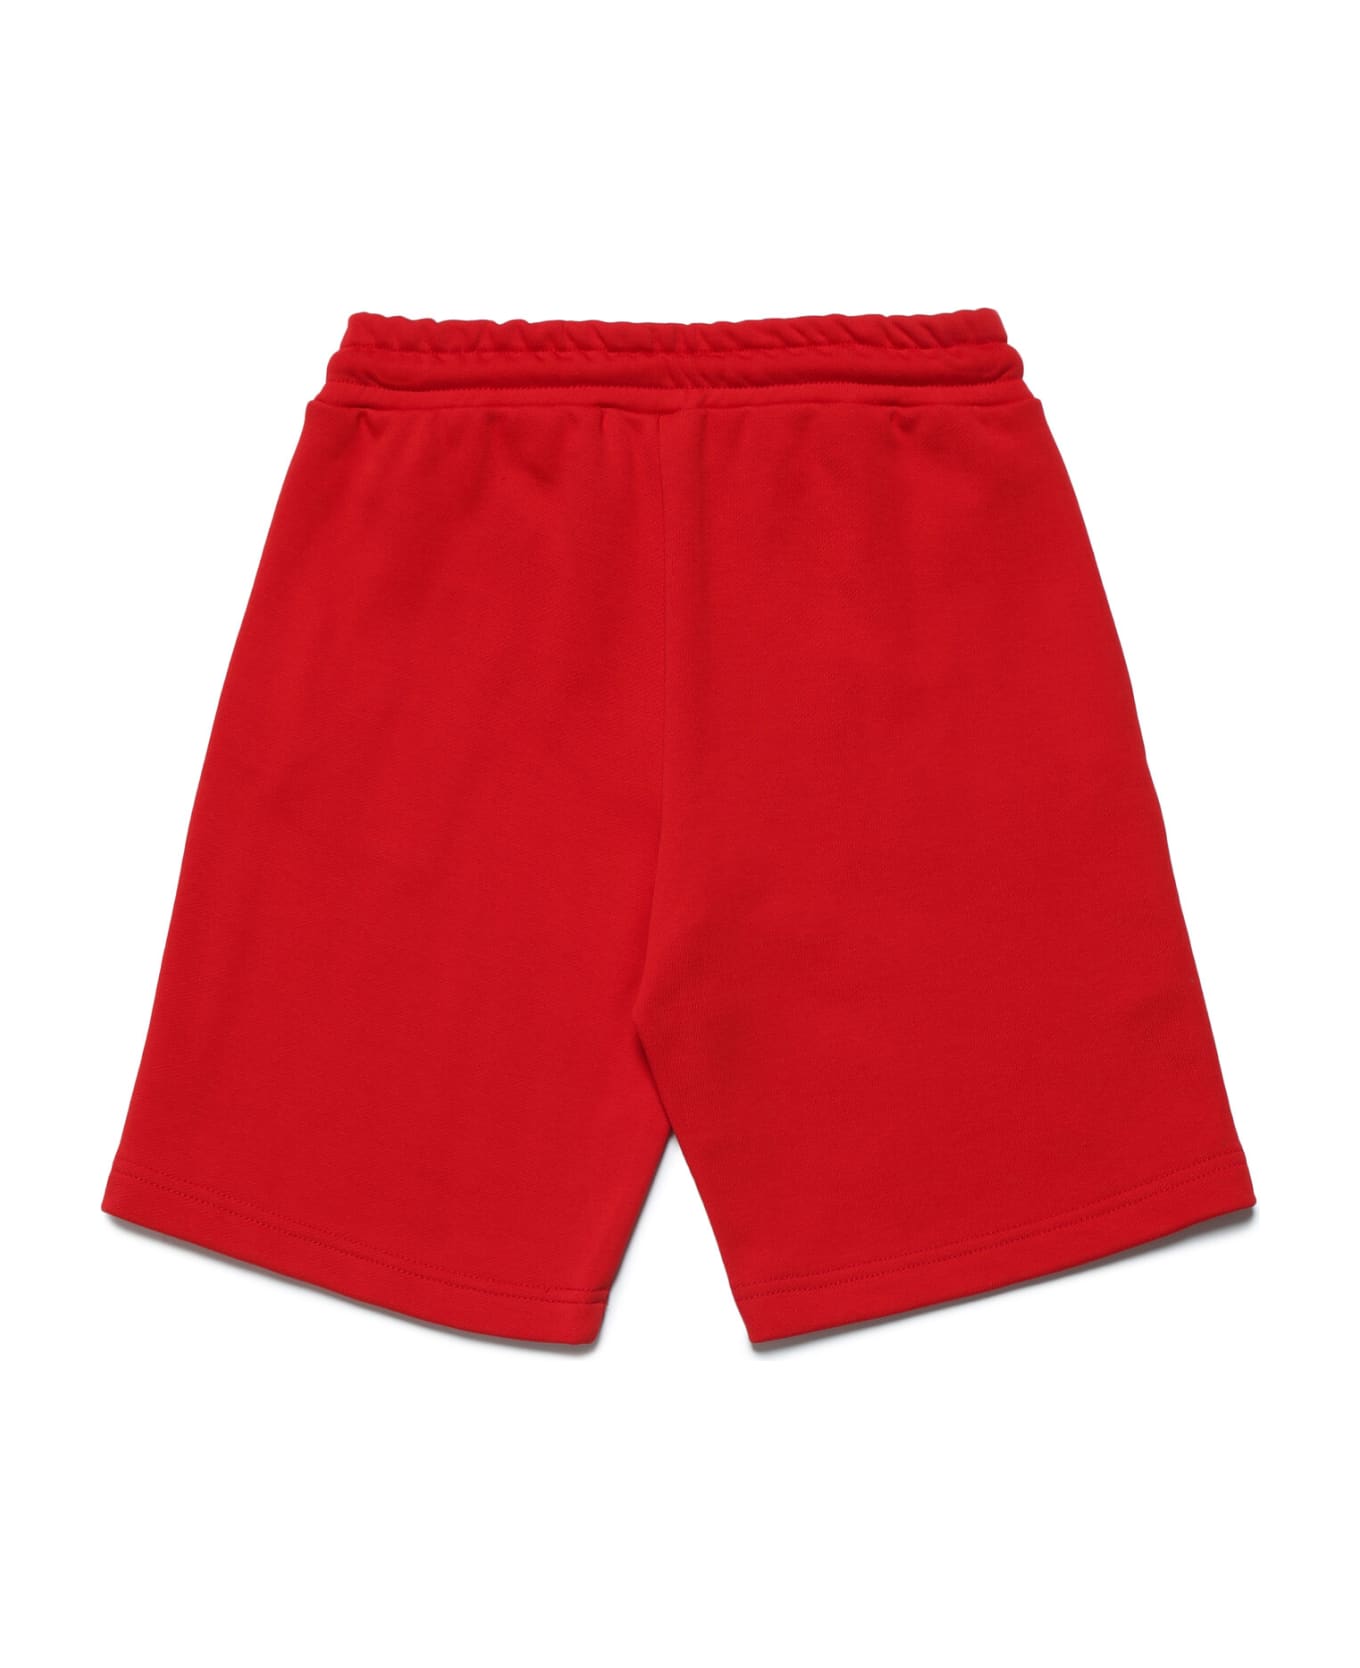 Diesel Pdadoind Shorts Diesel Red Cotton Shorts With Logo And Drawstring Waistband - Carnation red